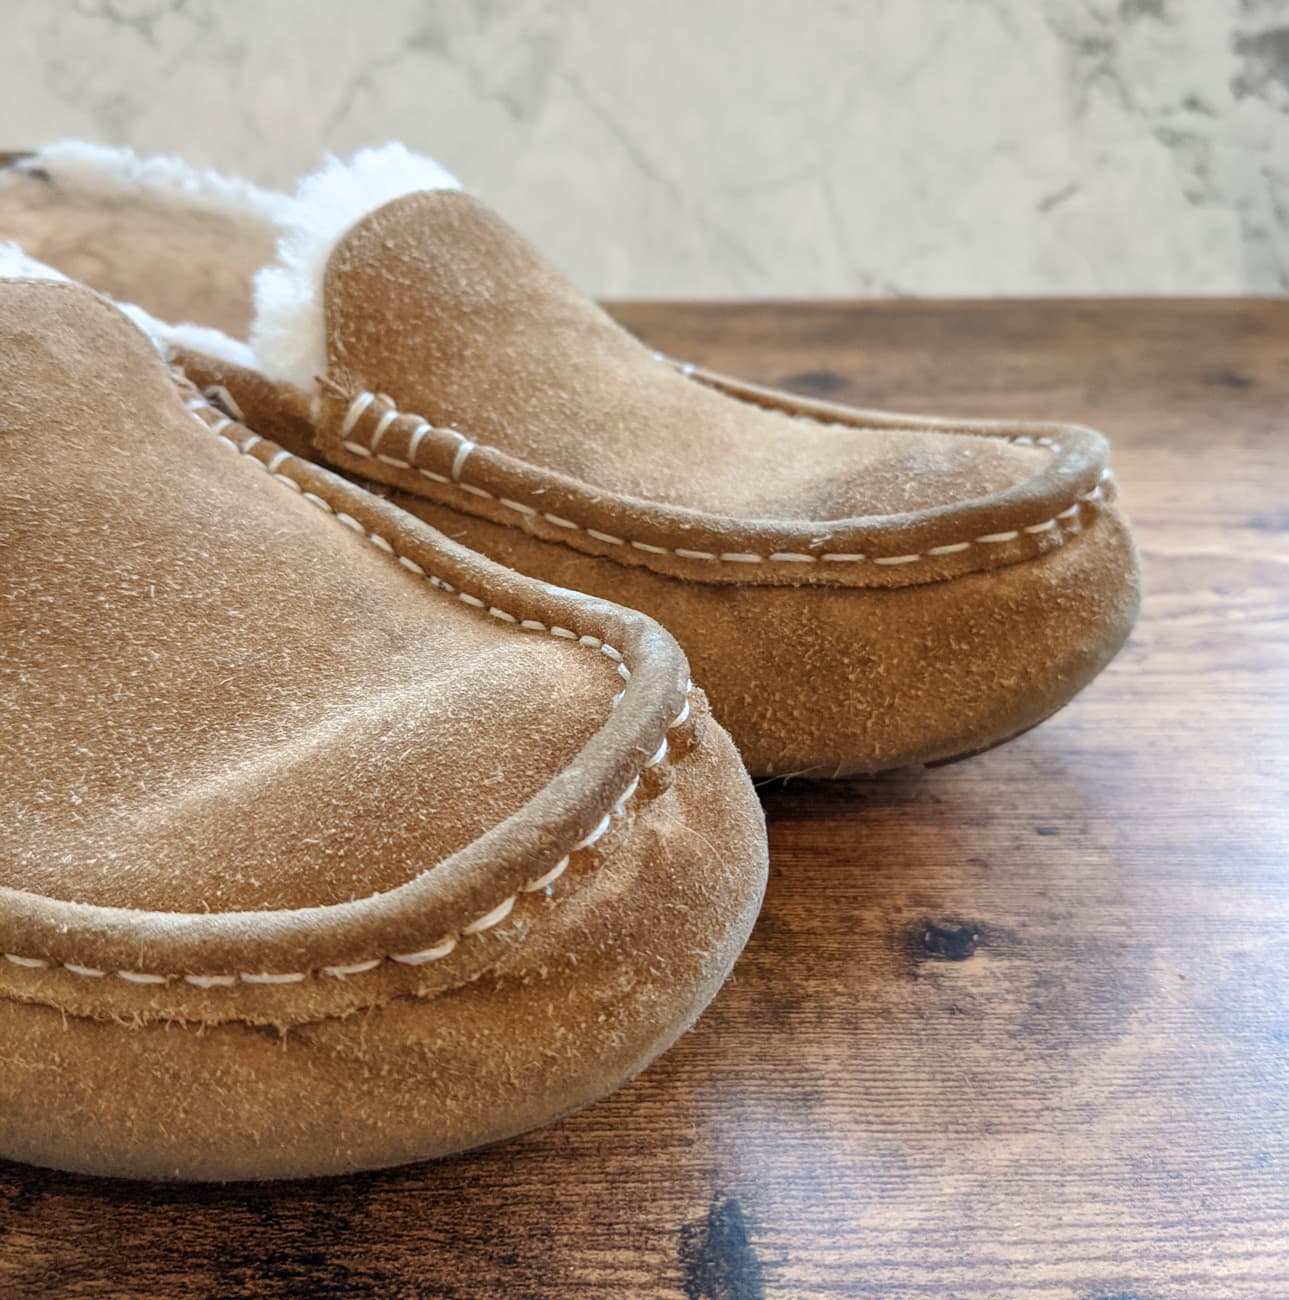 One step in cleaning sheepskin and suede slippers